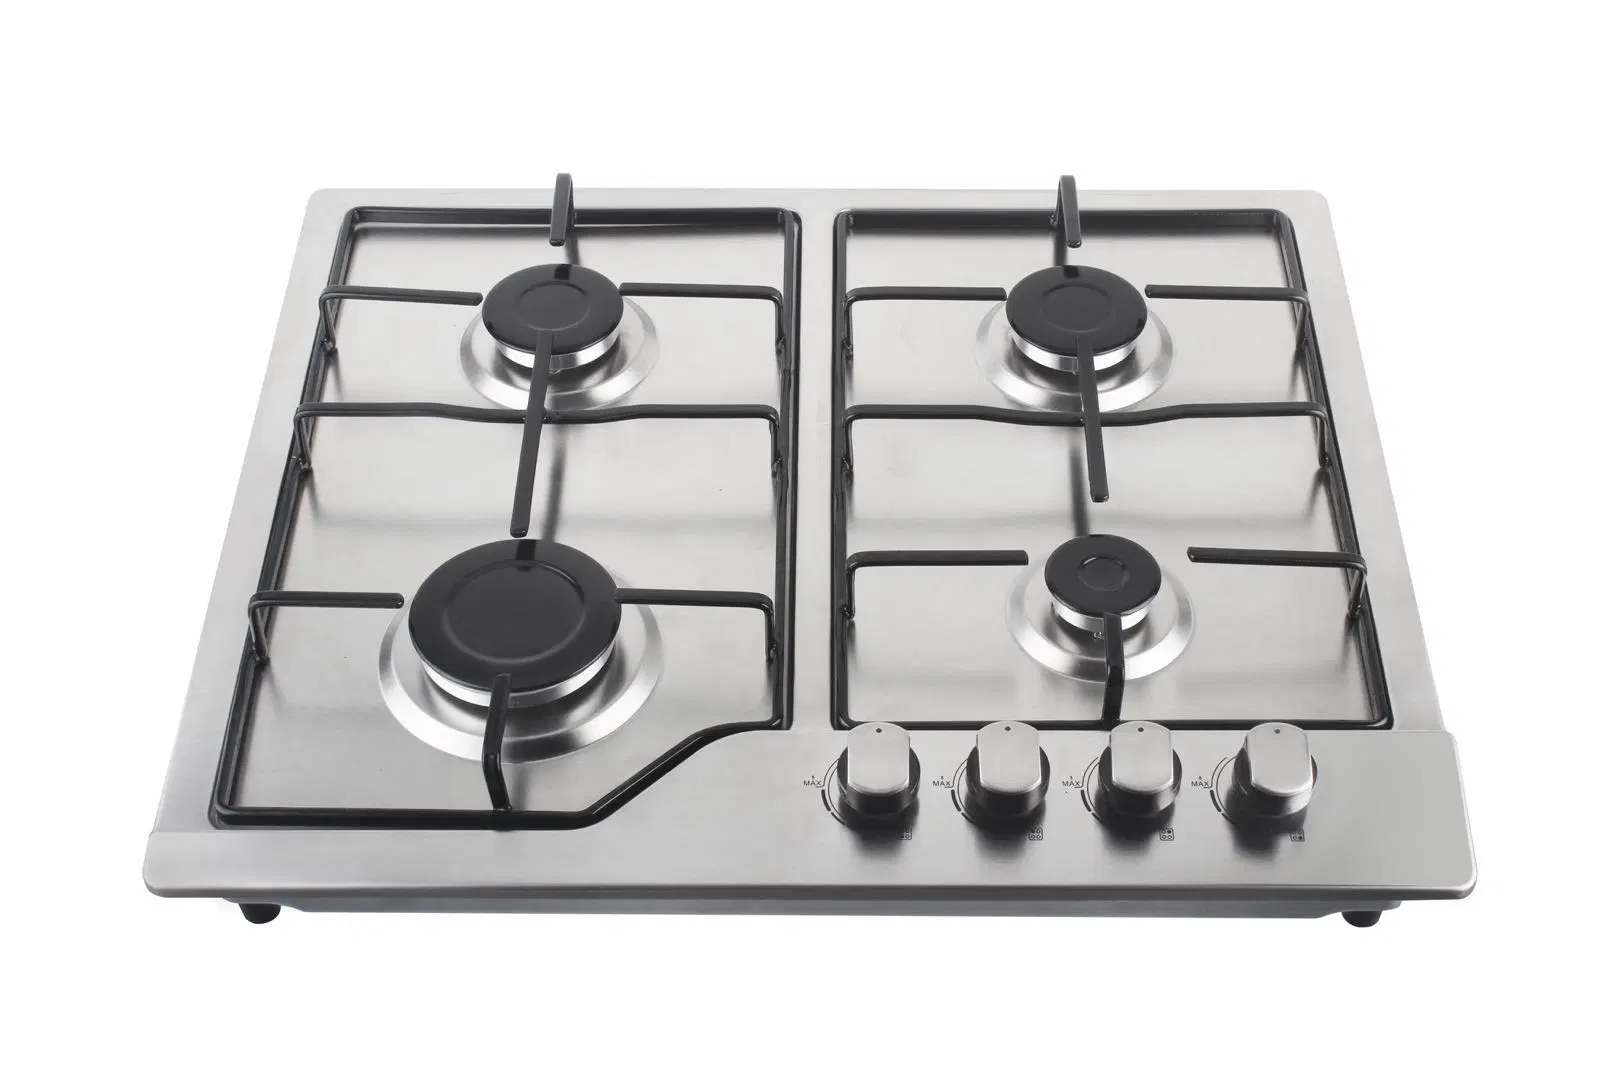 New Model for 4 Burners Gas Hobs